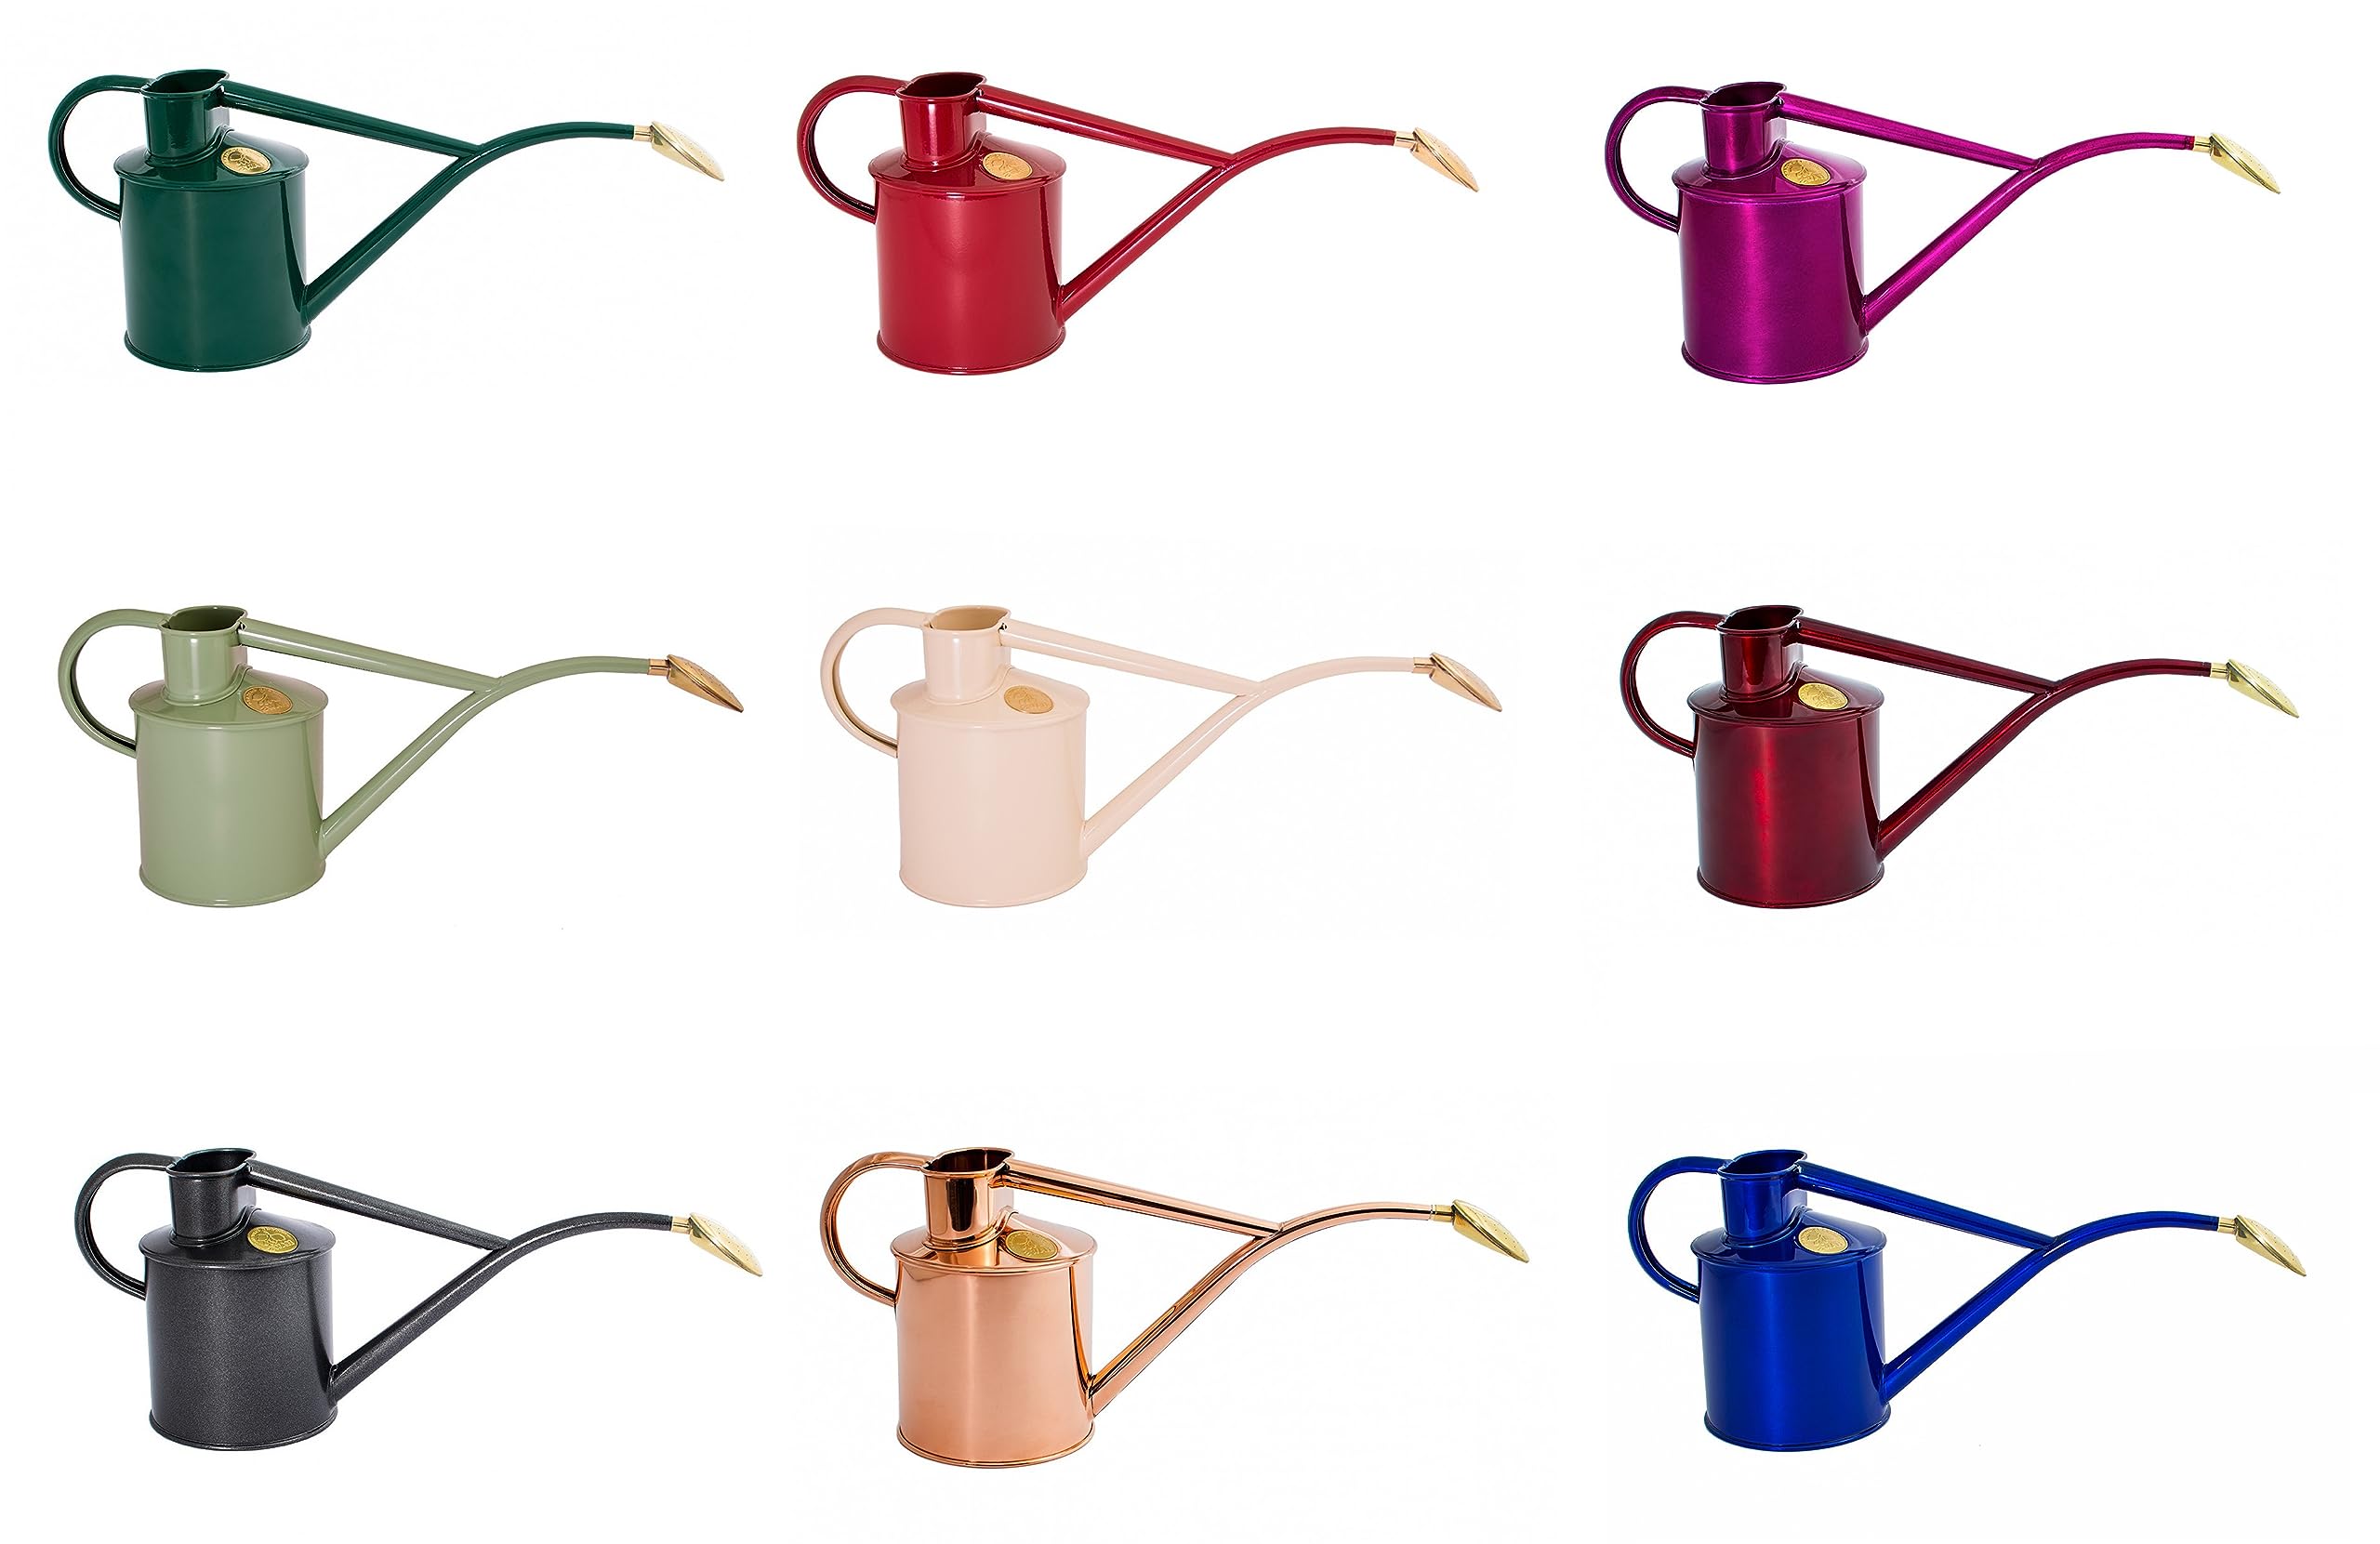 The Rowley Ripple Two Pint Watering Can Haws Zimmer Gießkanne 1 Liter (Green-Grün)